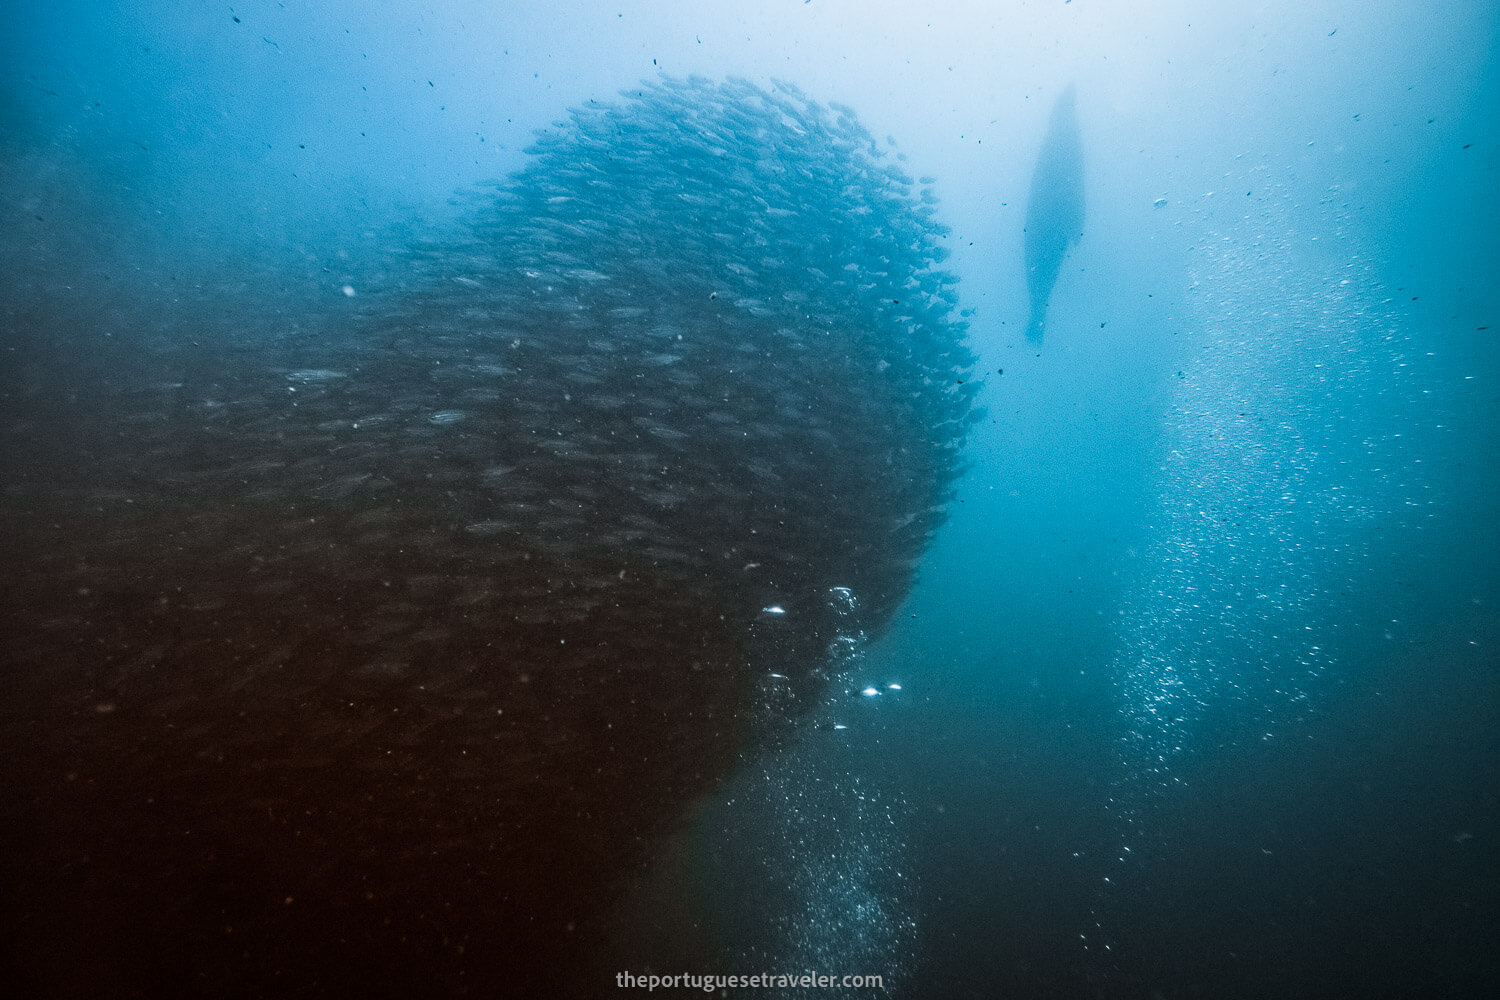 Diving in Kicker Rock, a school of salema fish and a sea lion